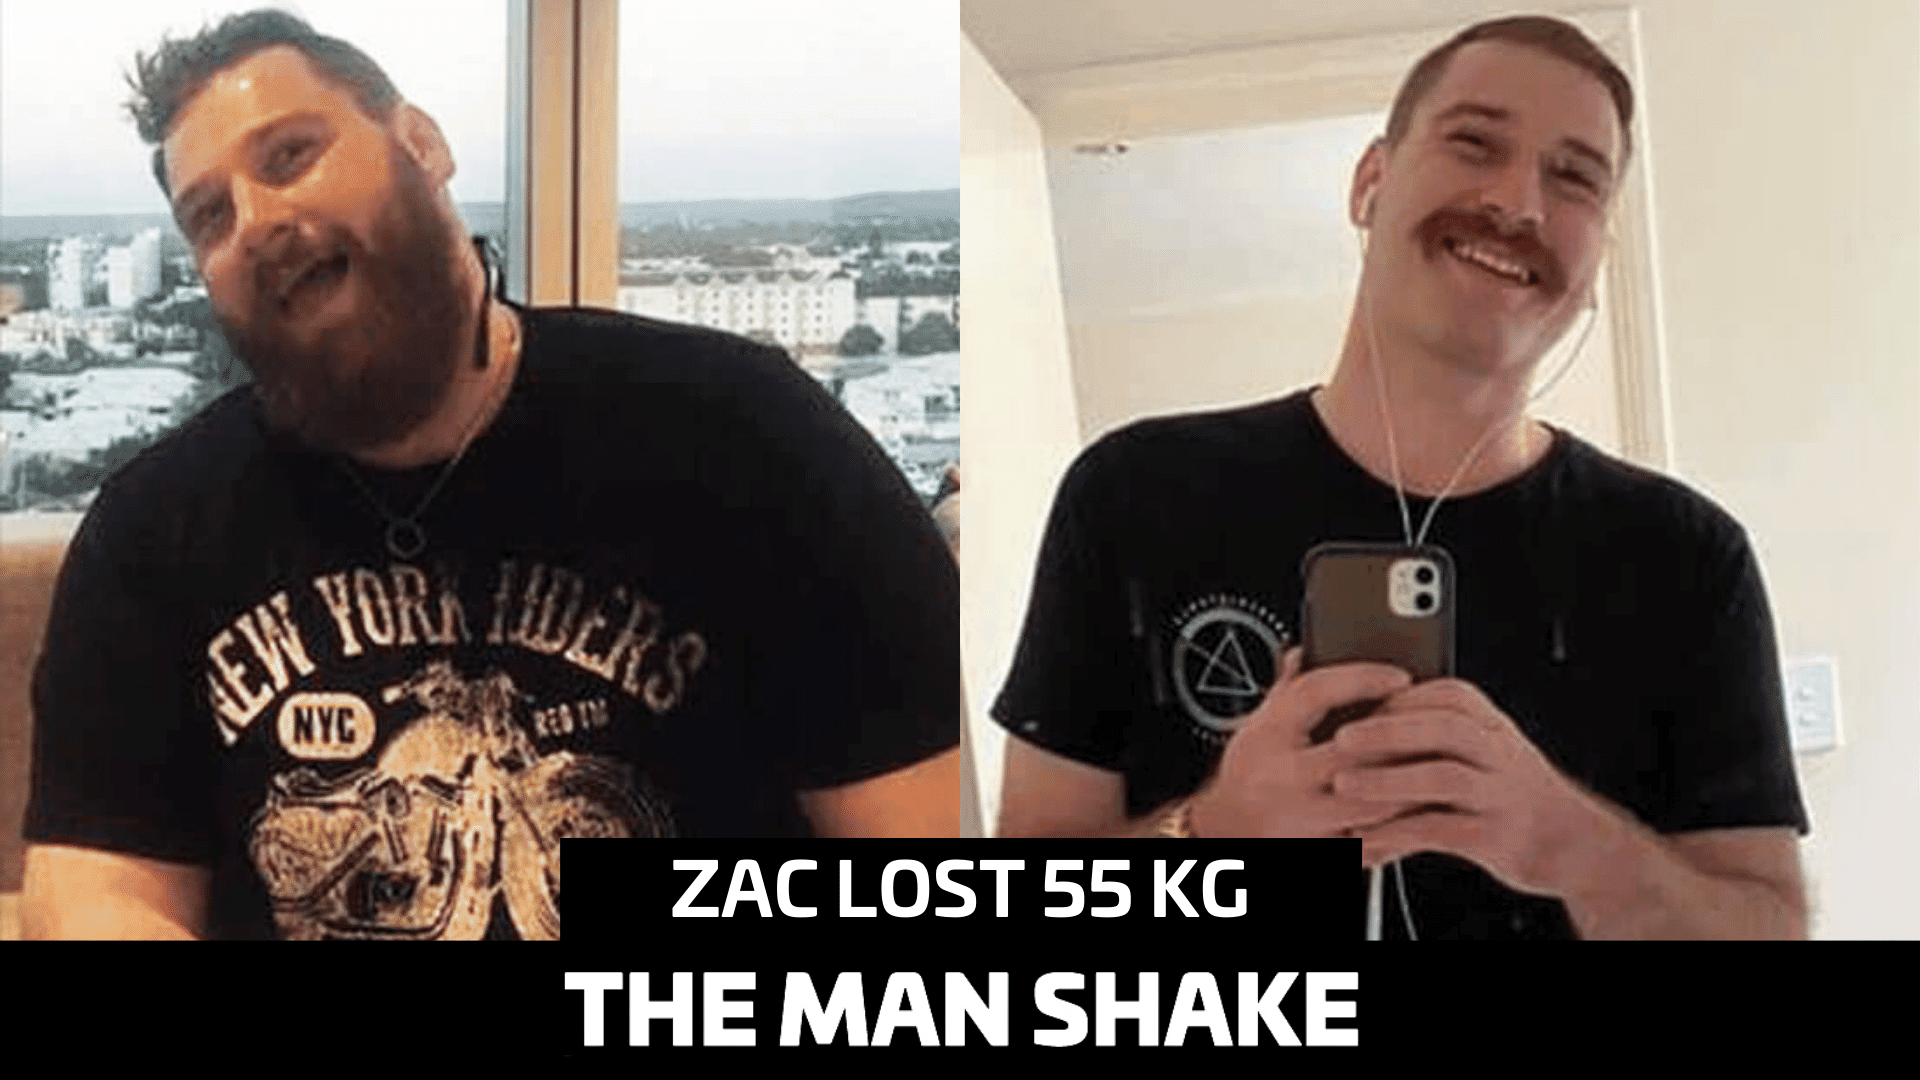 Zac lost a whopping 55kg for his son's.